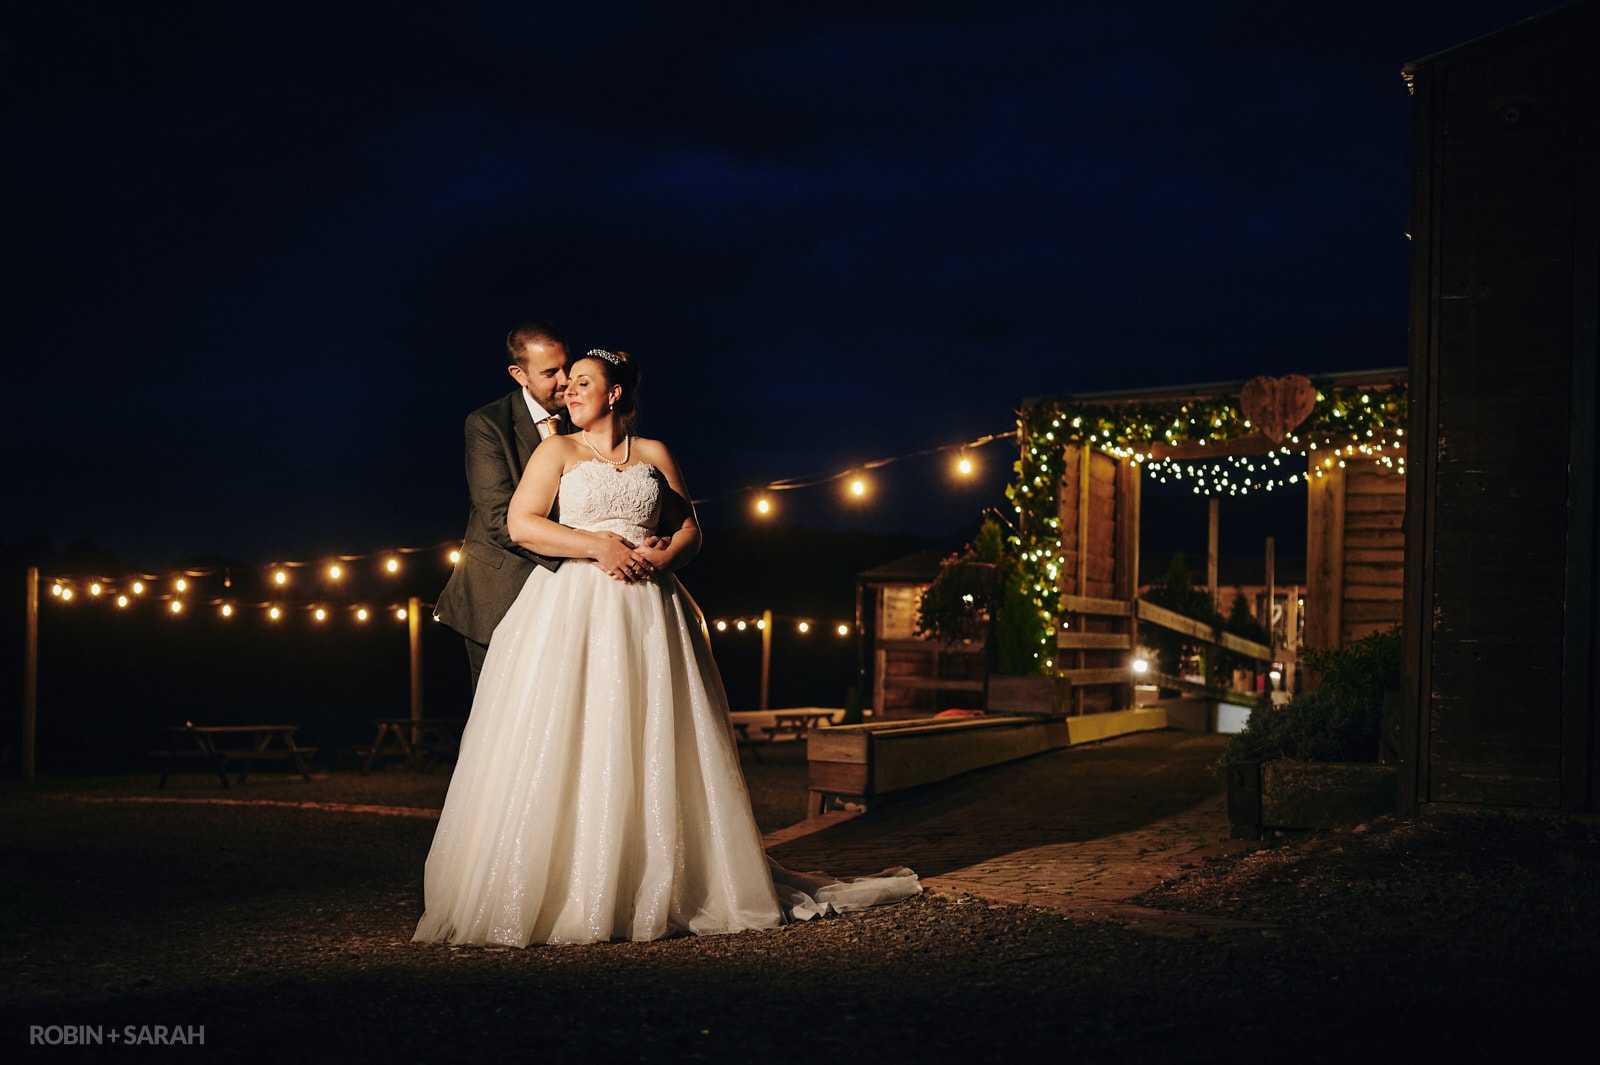 Bride and groom at night outside barn wedding venue